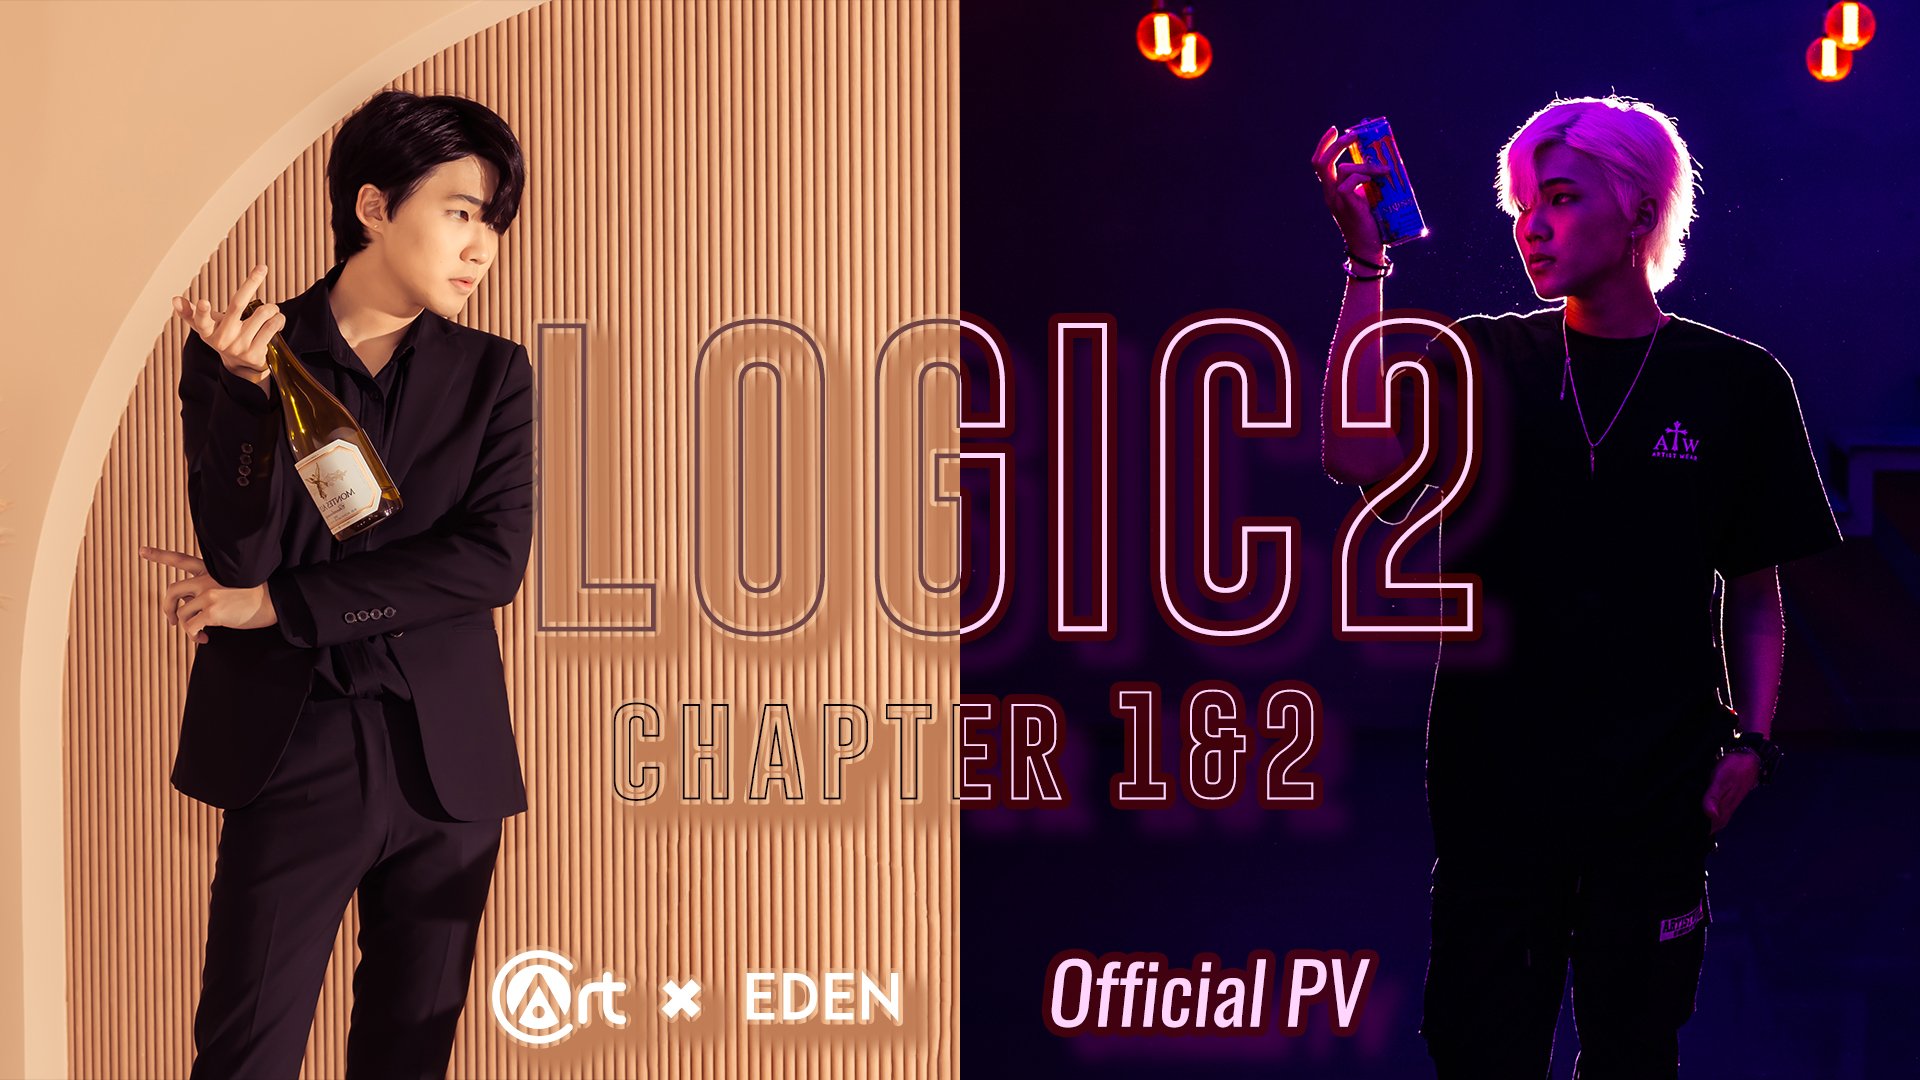 Eden - Logic 2 (all videos included in 1080p quality) Download INSTANTLY ↓